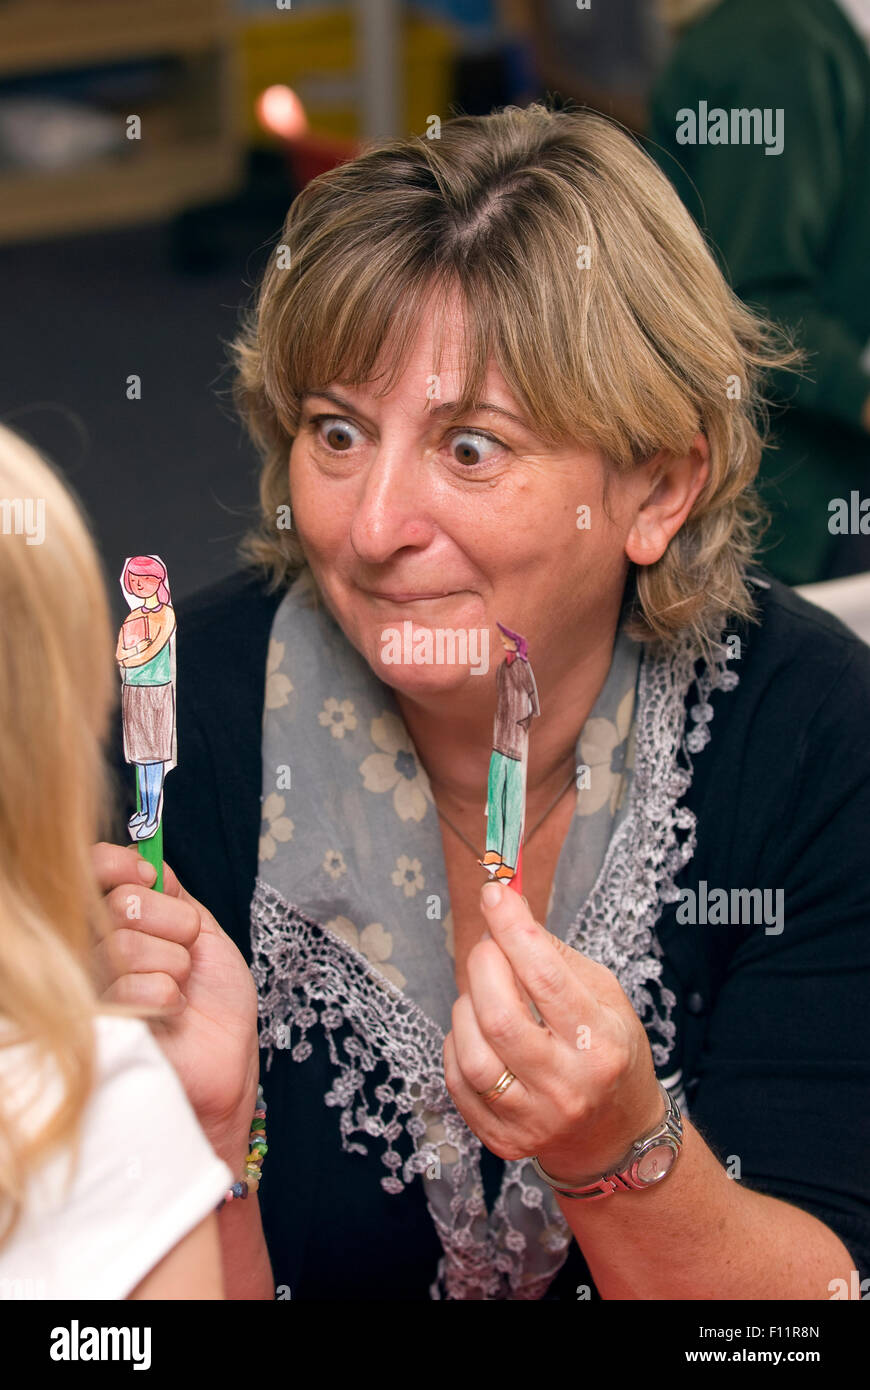 Member of primary school teaching staff at work in classroom, UK. Stock Photo